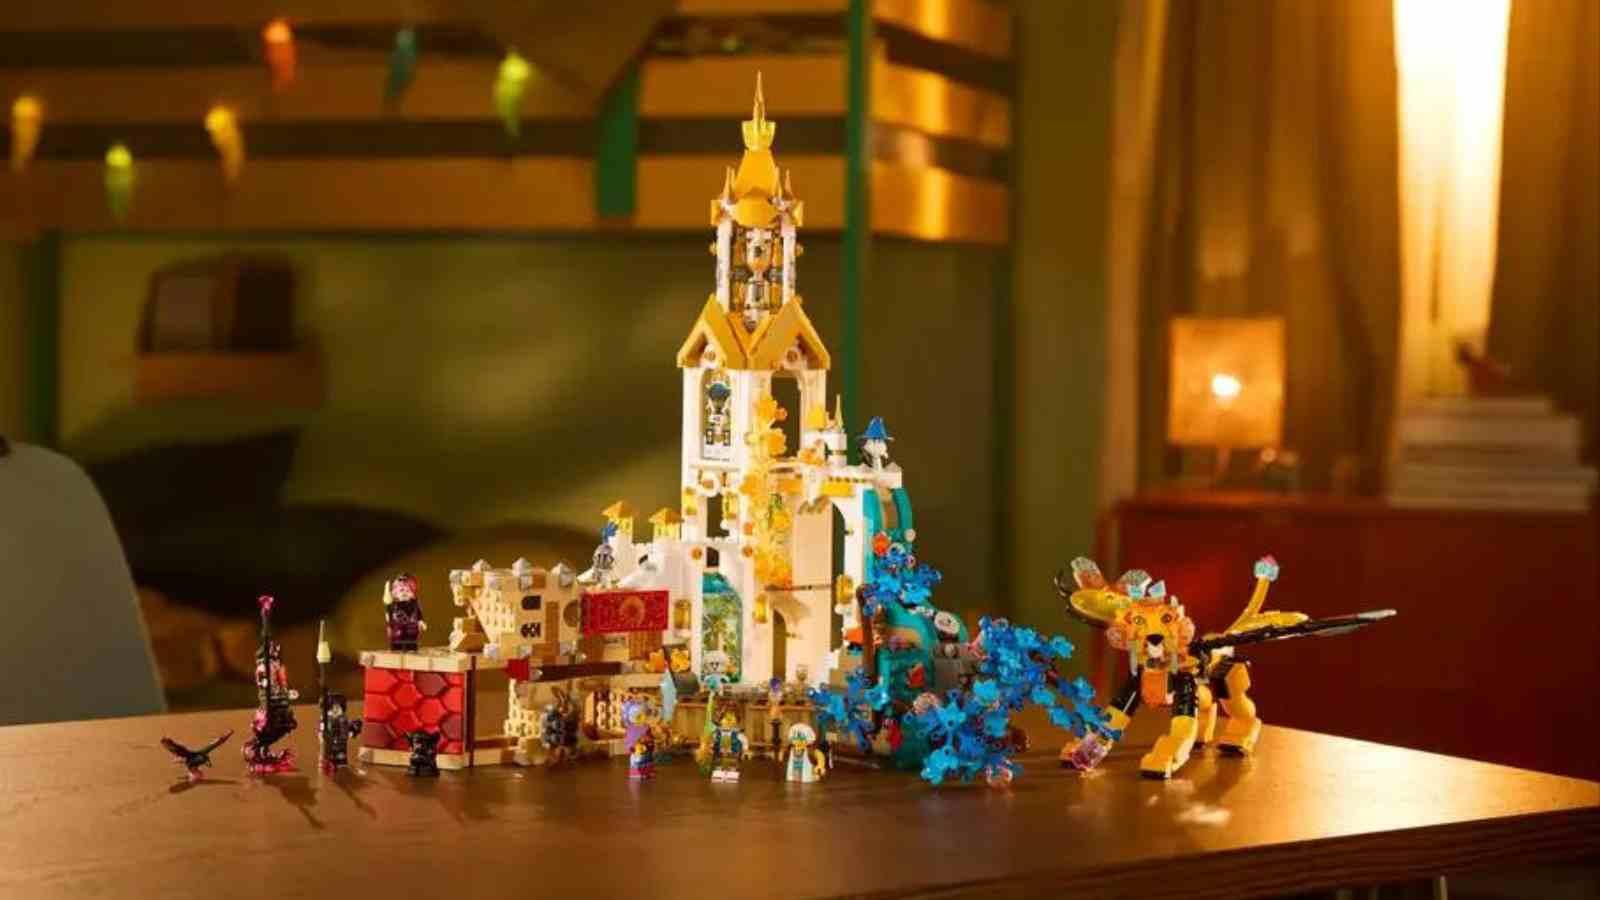 The LEGO DREAMZzz Castle Nocturnia on display